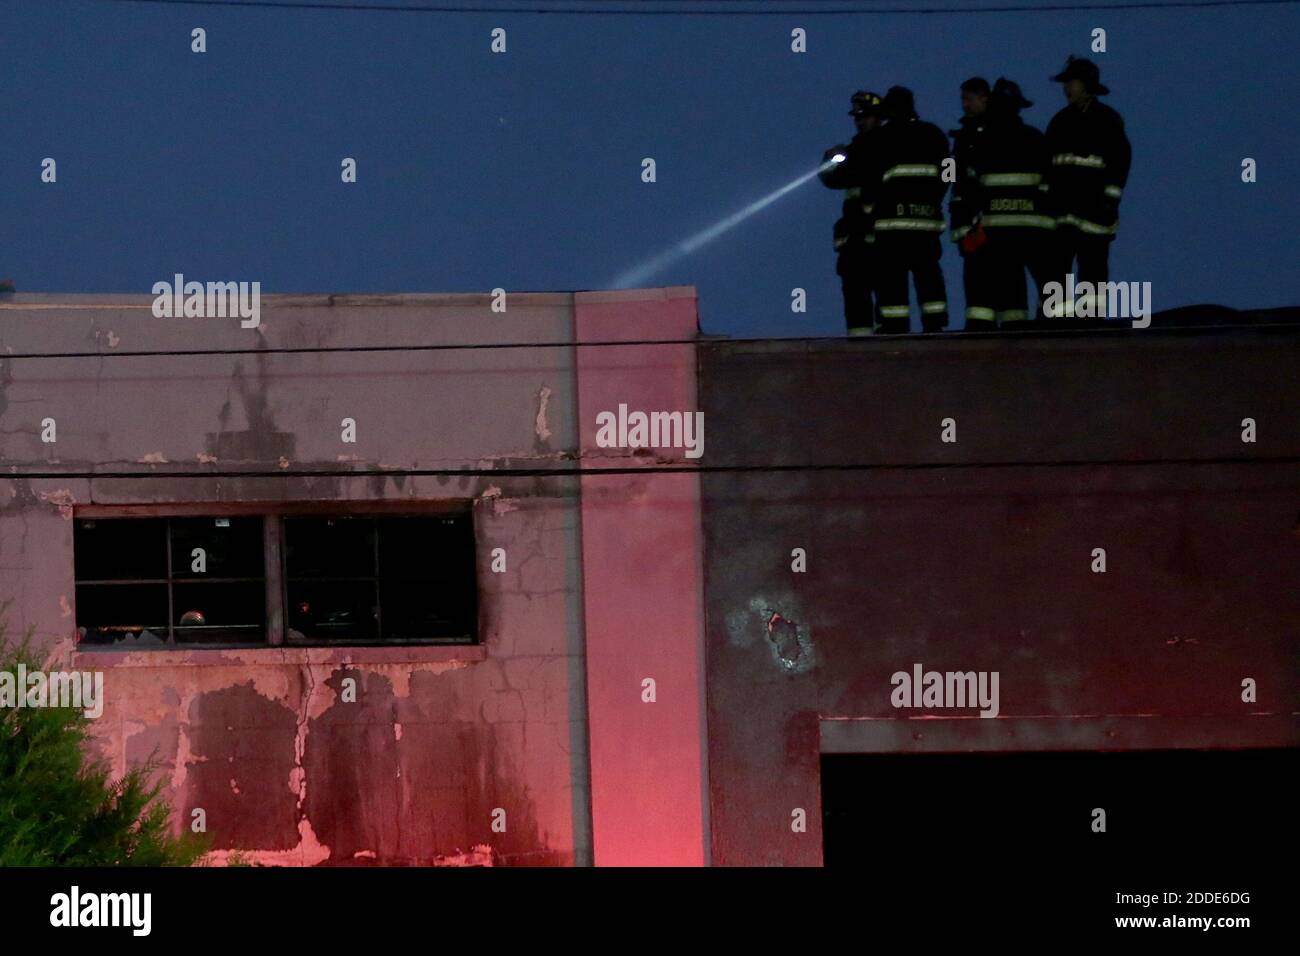 NO FILM, NO VIDEO, NO TV, NO DOCUMENTARY - Firefighters survey a fatal fire where at least nine people died in a warehouse party on 31st Avenue in Oakland, CA, USA, on Saturday, December 3, 2016. Photo by Ray Chavez/Bay Area News Group/TNS/ABACAPRESS.COM Stock Photo